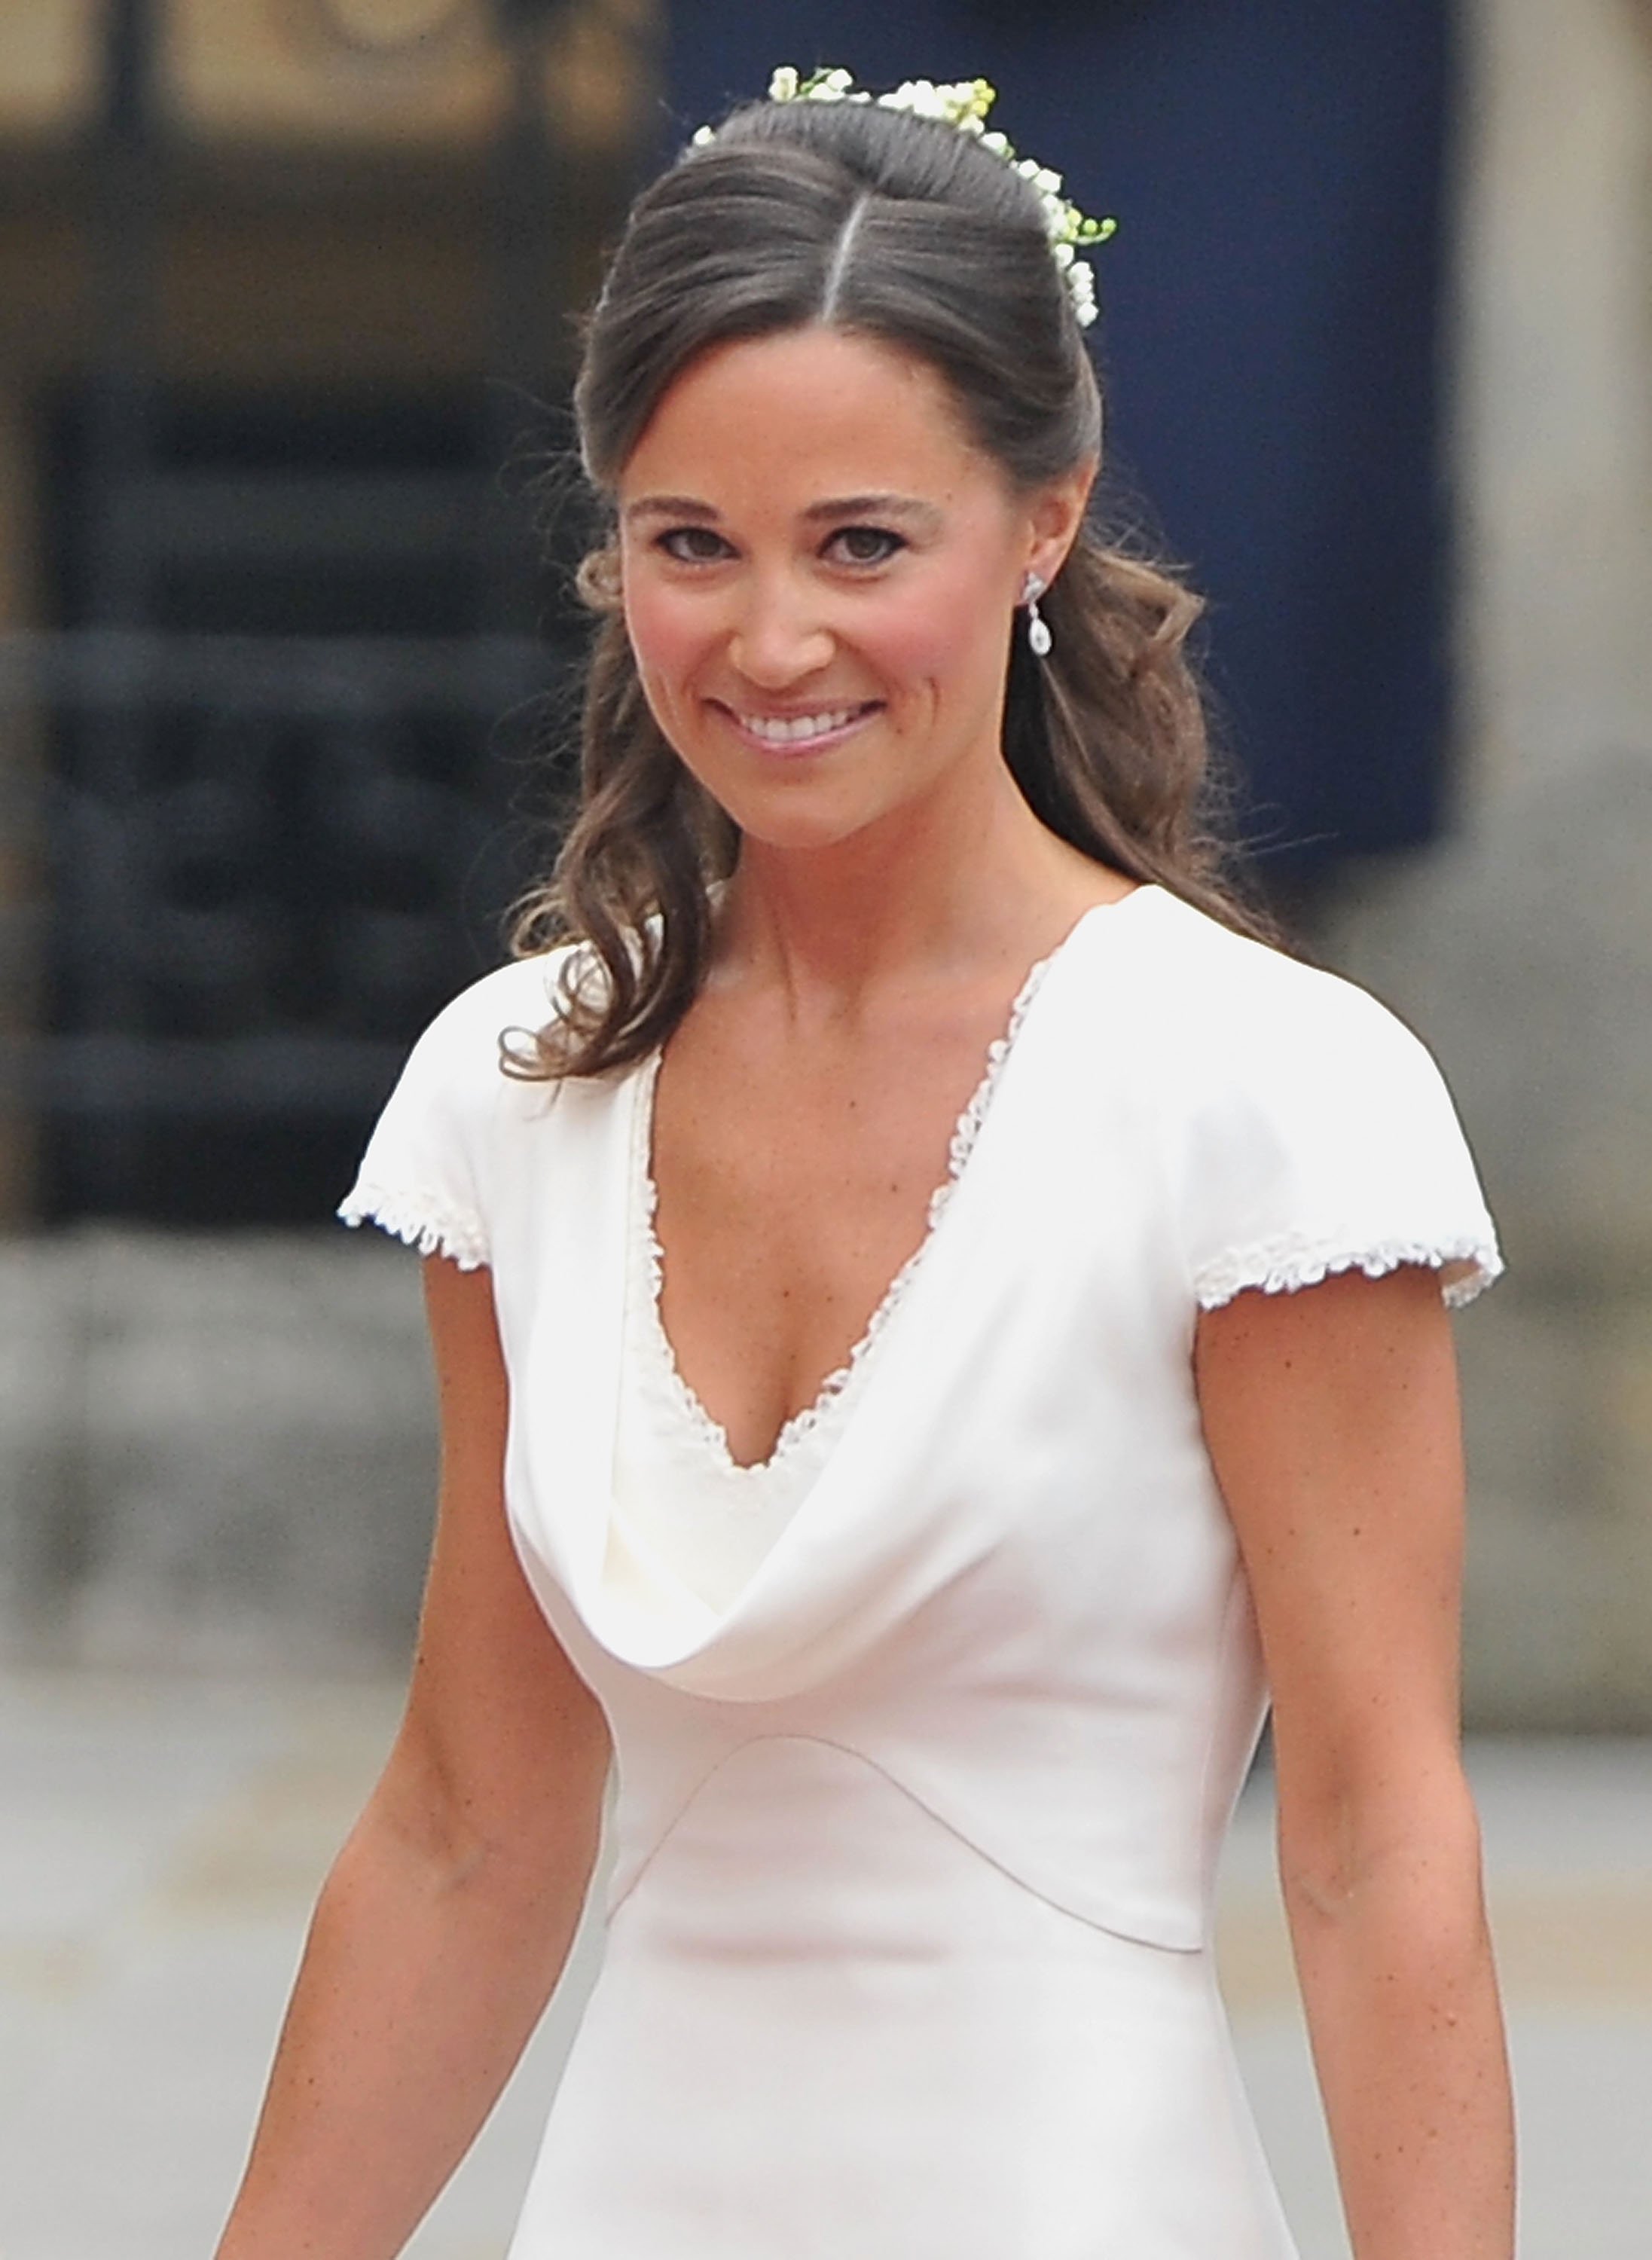 Pippa Middleton at the Royal Wedding of Prince William to Catherine Middleton on April 29, 2011 in London. | Source: Getty Images